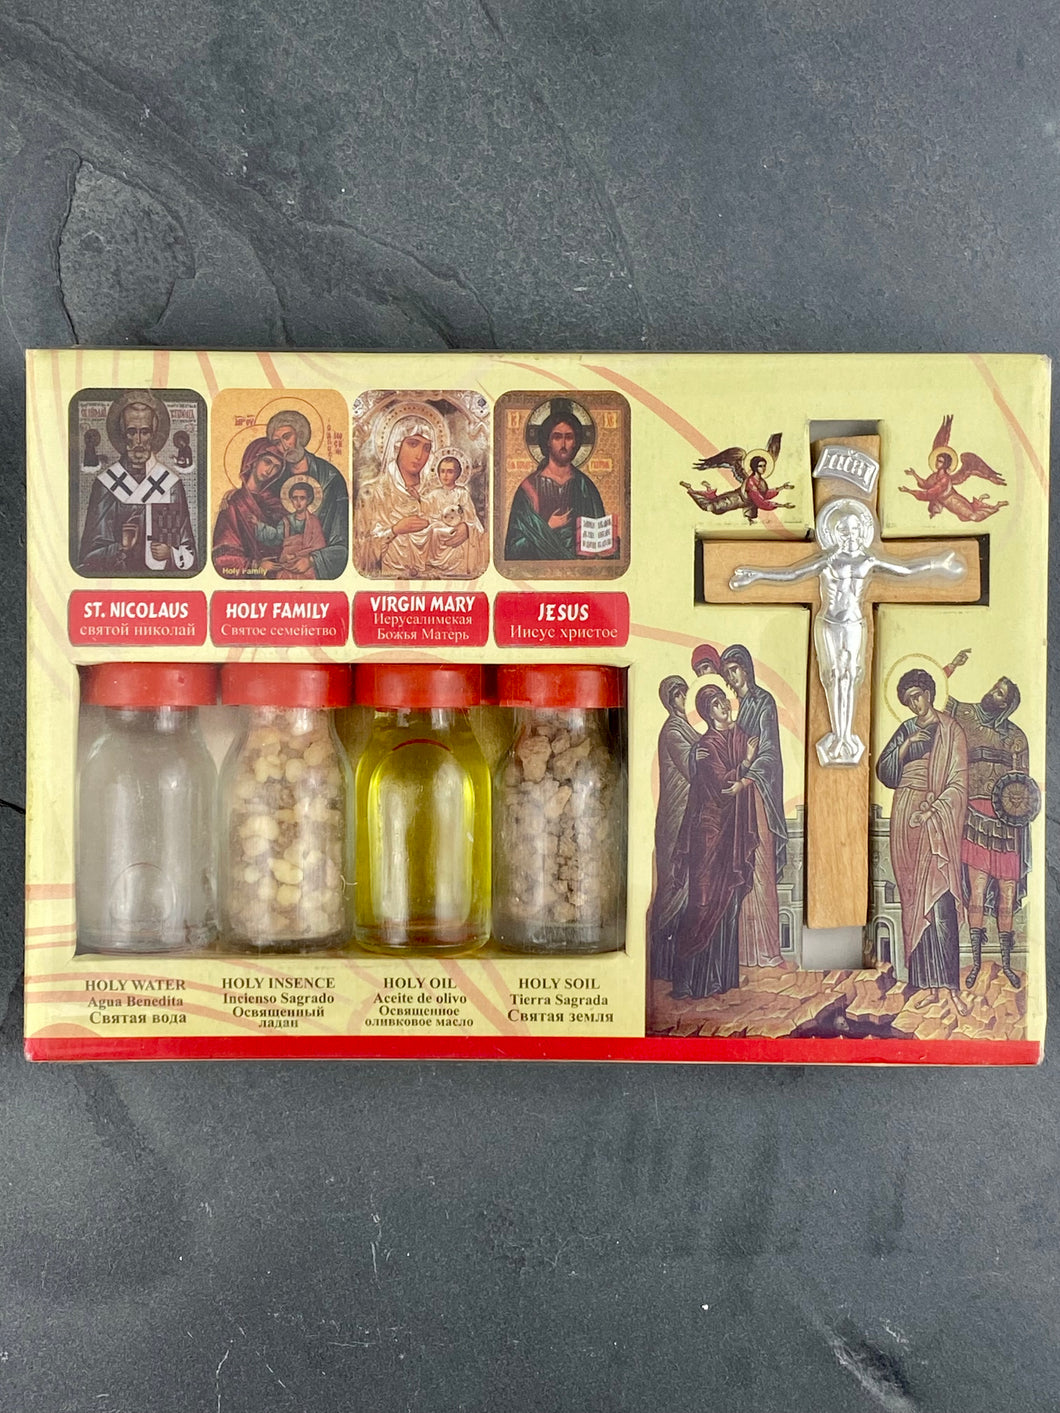 This Holy Box Set from Jerusalem contains Pure Water from the Jordan River, Genuine Earth From Jerusalem, Holy Olive Oil from Bethlehem, Incense and Olive Wood Cross from the Holy Land. HB20223